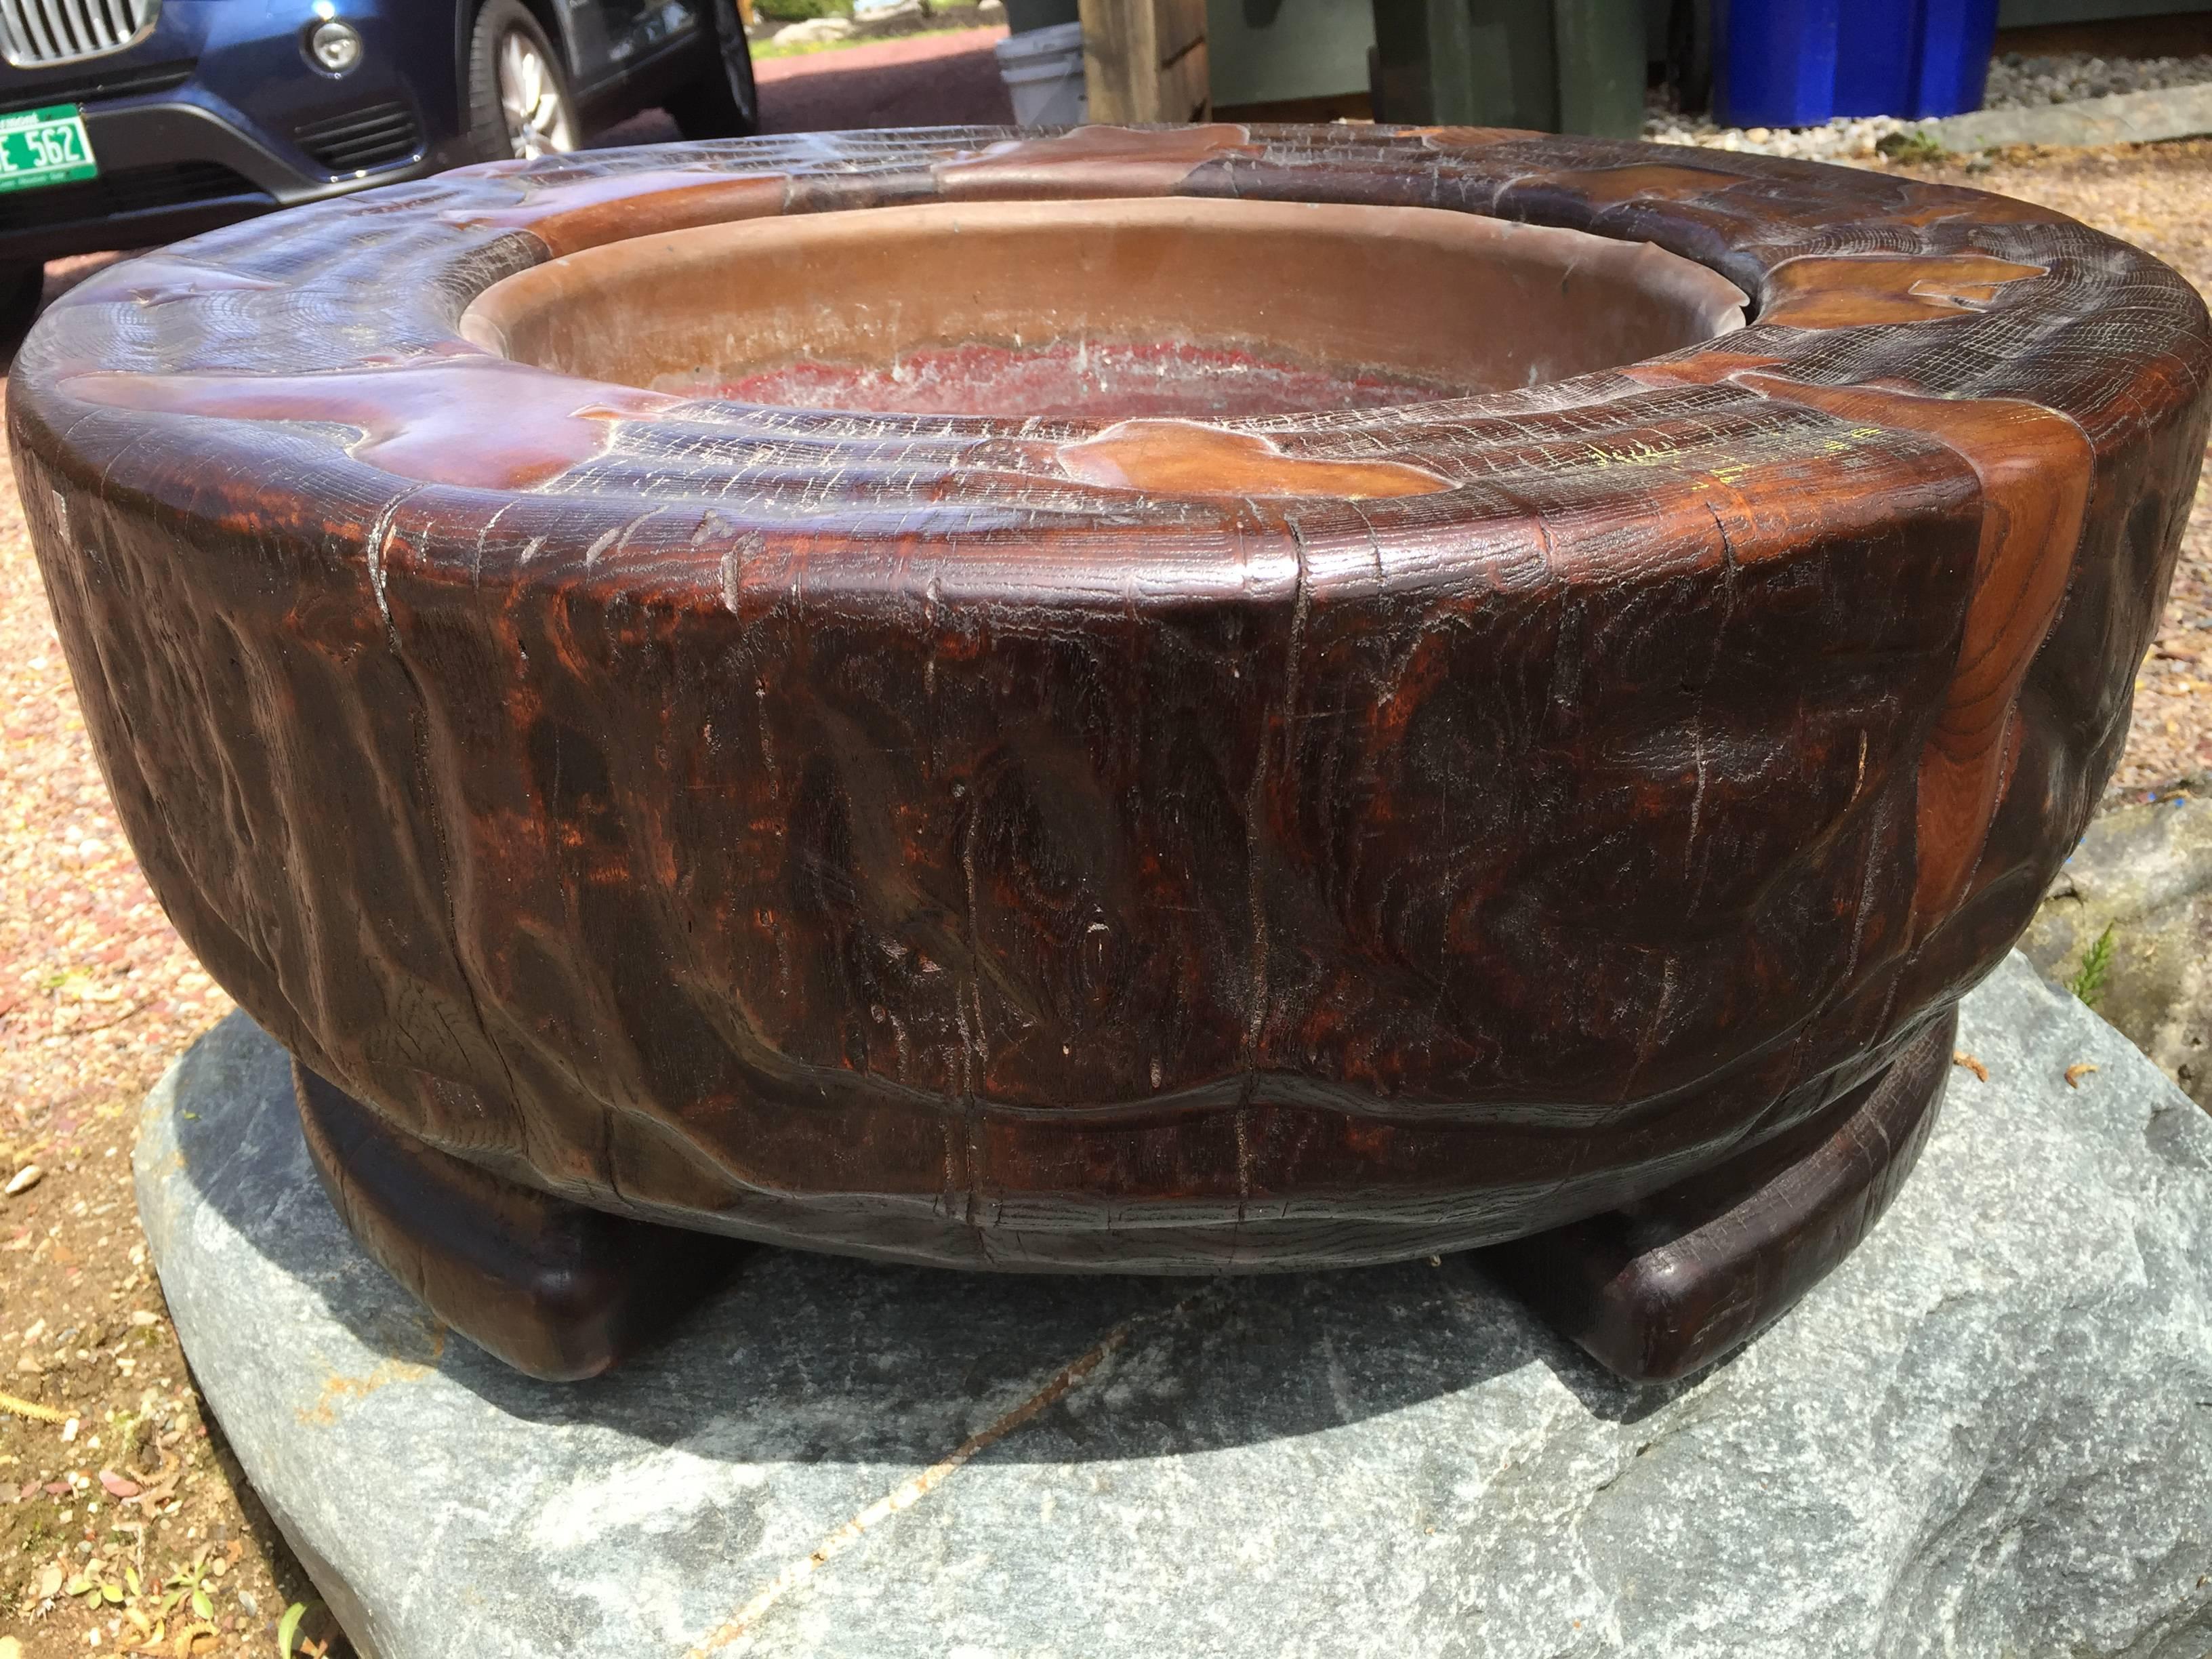 Here's a beautiful and serene way to accent your indoor art space or outdoor garden space with this rare handcrafted treasure from Japan!

Our hard to find antique early to mid-20th century planter is crafted from keyaki (elmwood) and copper